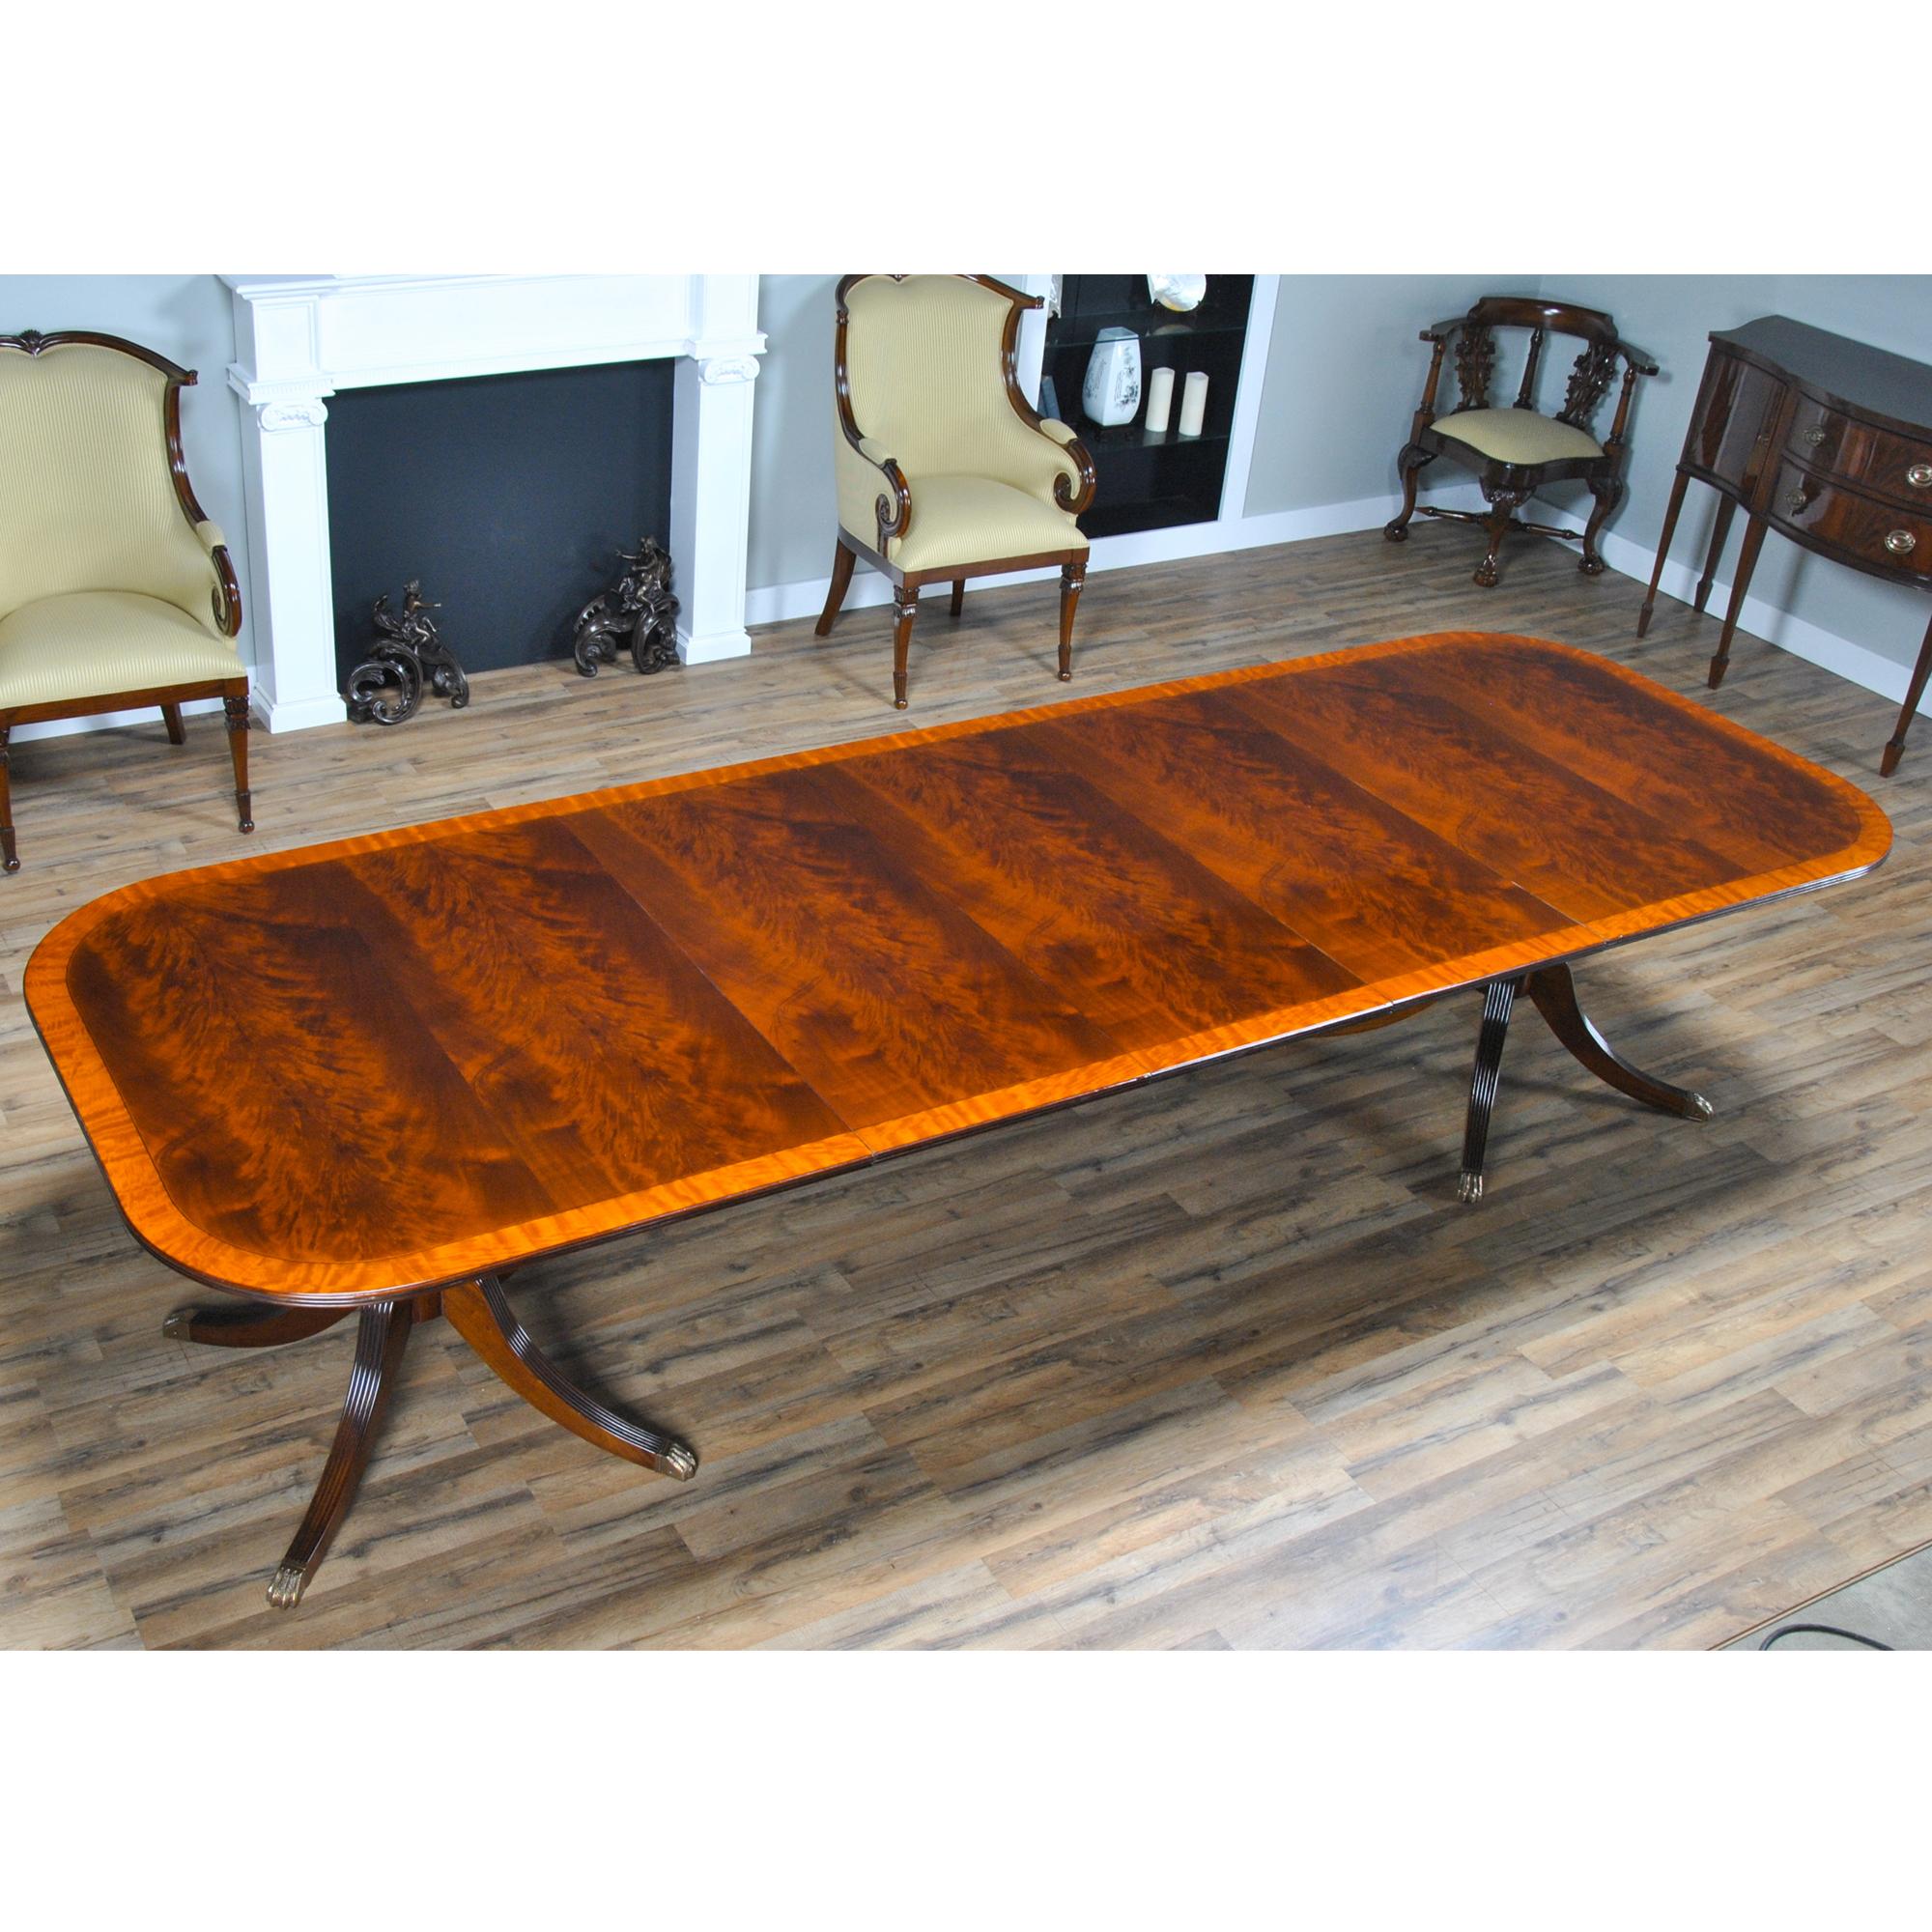 The Classic Mahogany Dining Table. We took many of our customers favorite features from different extension style dining tables and combined them into this one item. From the table top with it’s satinwood and pin stripe banding and the figured